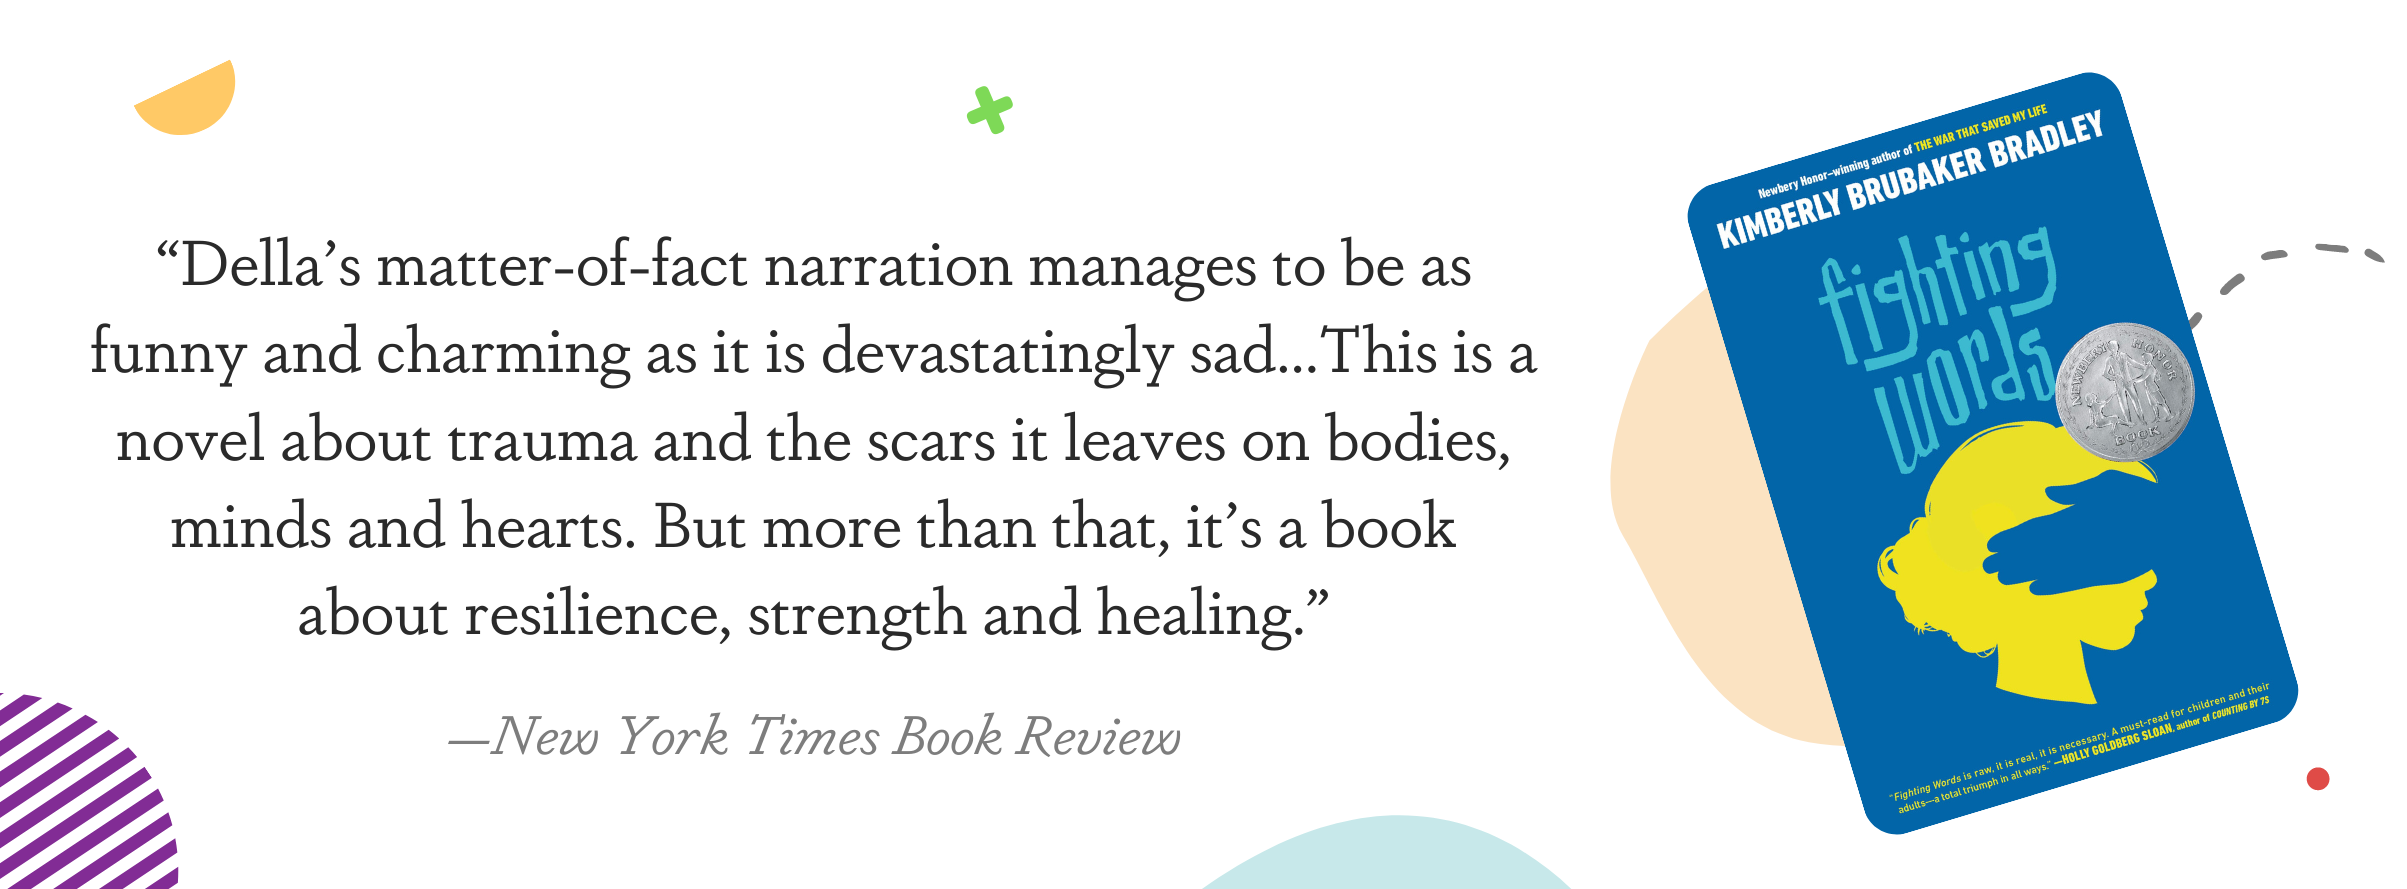 Image displaying a New York Times Book Review Quote: "Della's matter-of-fact narration manages to be as funny and charming as it is devastatingly sad...This is a novel about trauma and the scars it leaves on bodies, minds and hearts. But more than that, it's a book about resilience, strength and healing."